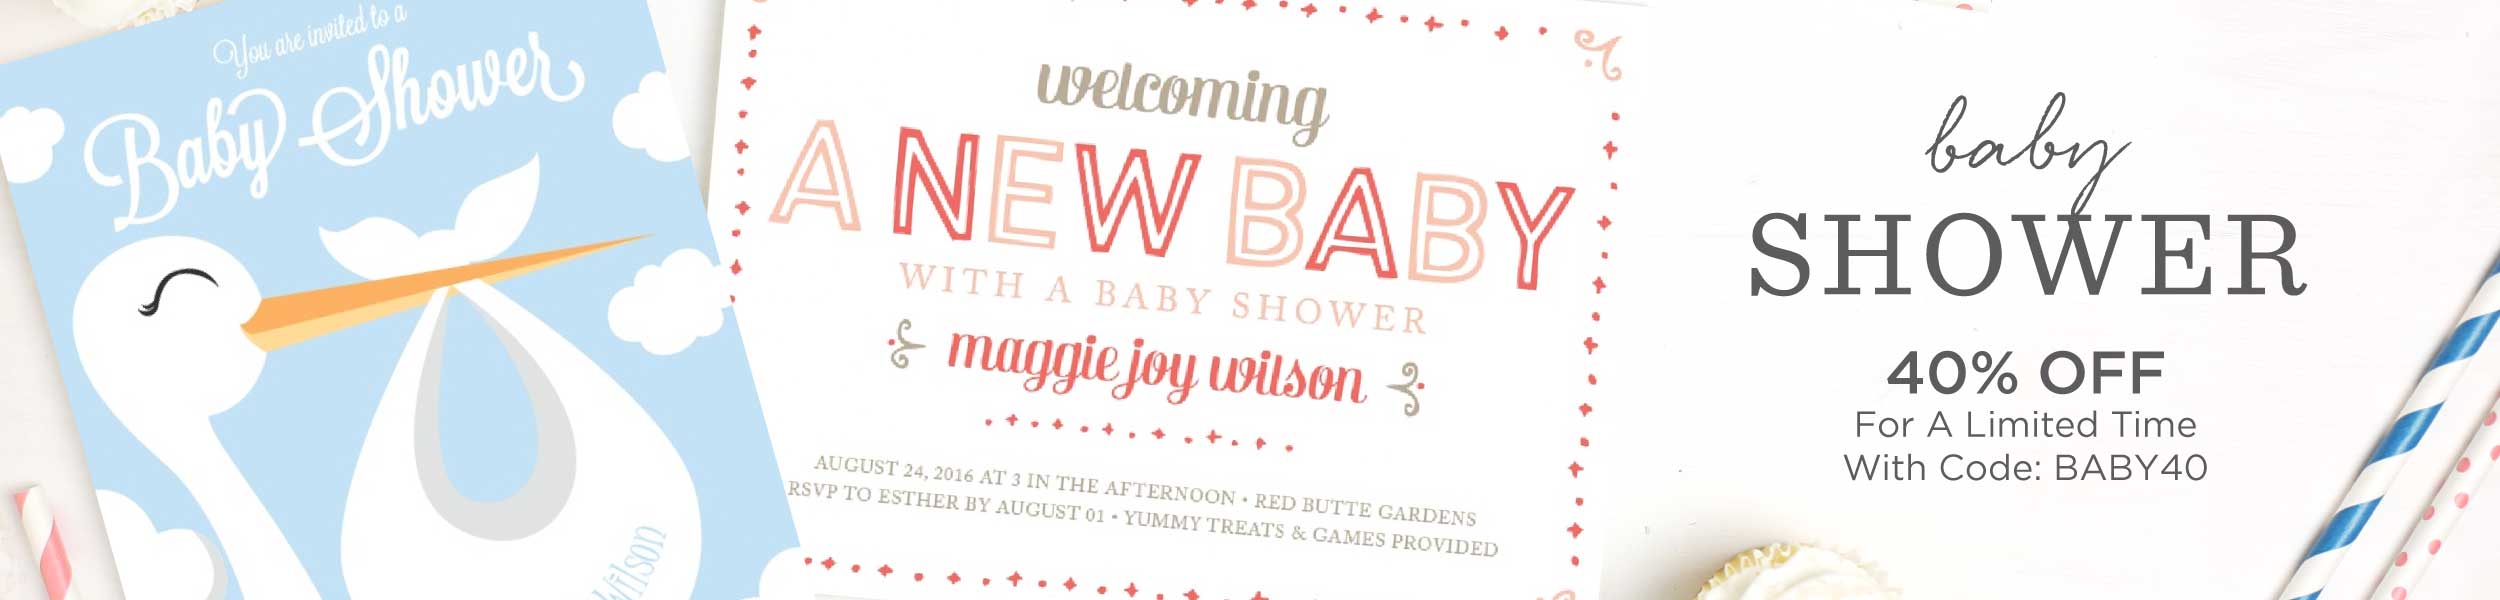 Full Size of Baby Shower:nursery Themes Elegant Baby Shower Unique Baby Shower Decorations Pinterest Baby Shower Ideas For Girls Baby Shower Card Message Ideas Zazzle Invitations Baby Girl Themes For Baby Shower Oriental Trading Baby Shower